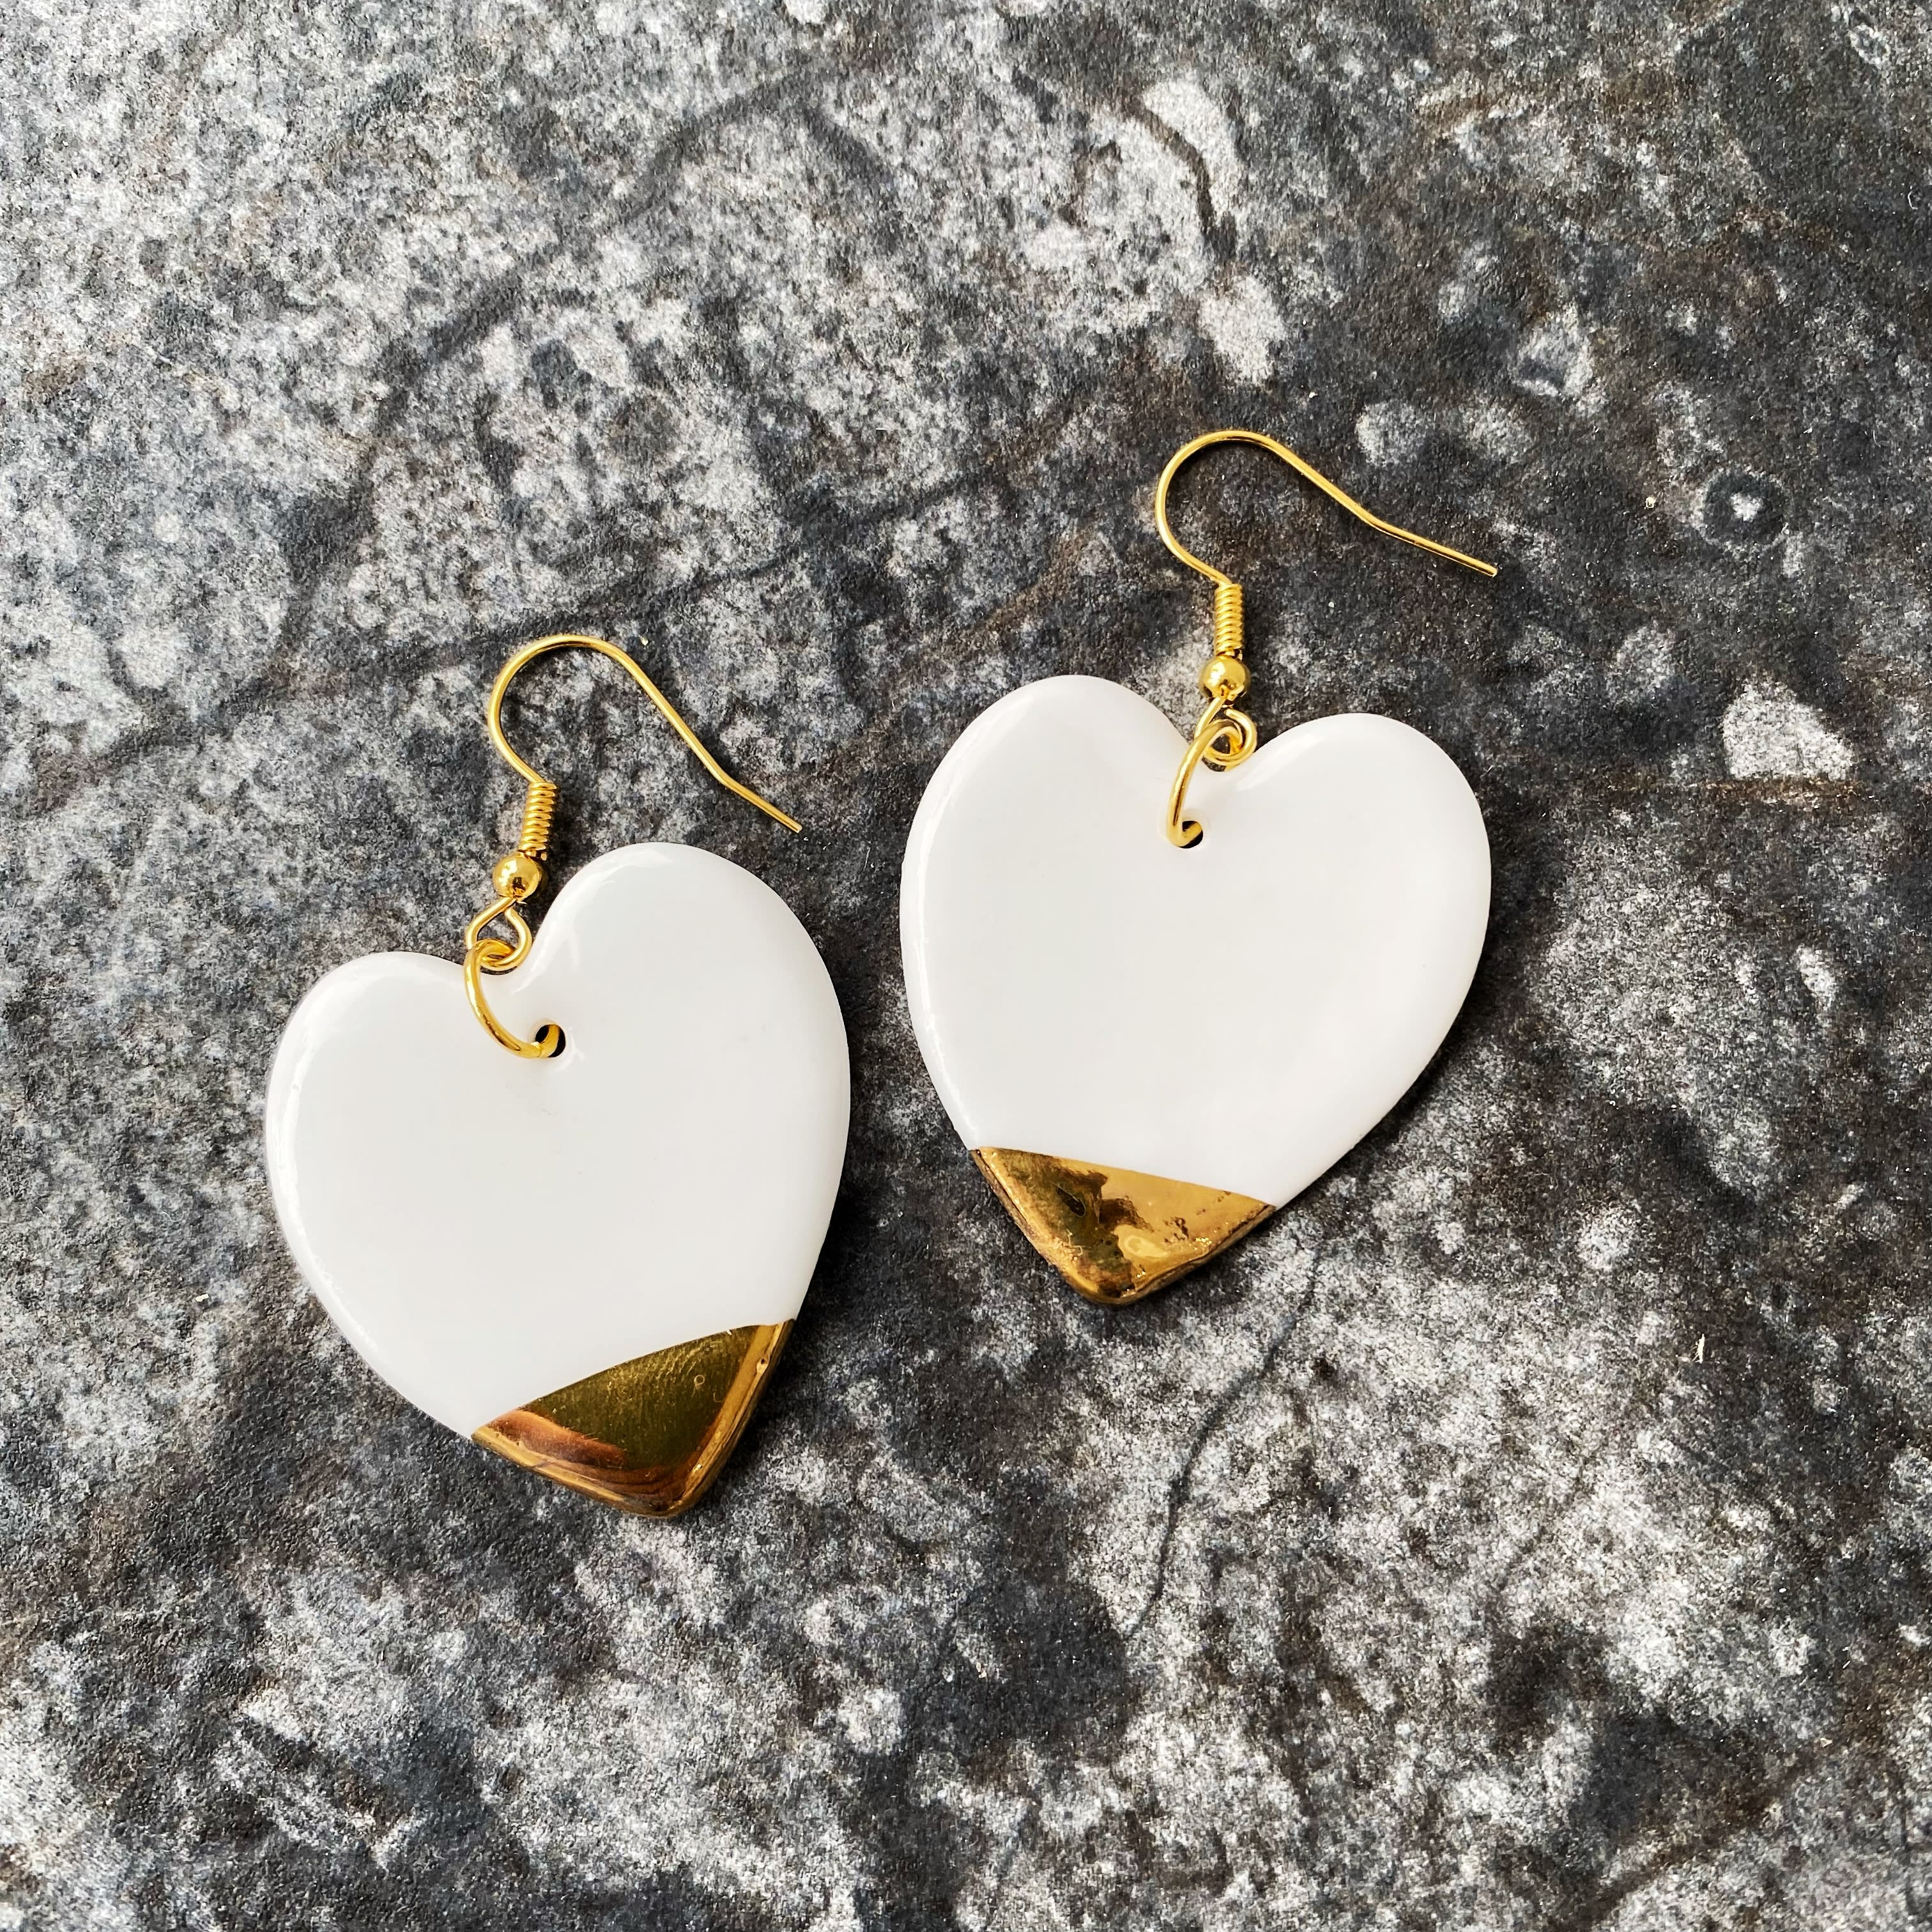 Heart Shaped Dangly Earrings With Gold Tip Jewellery Kina Ceramics Ceramic Shop In Oxford